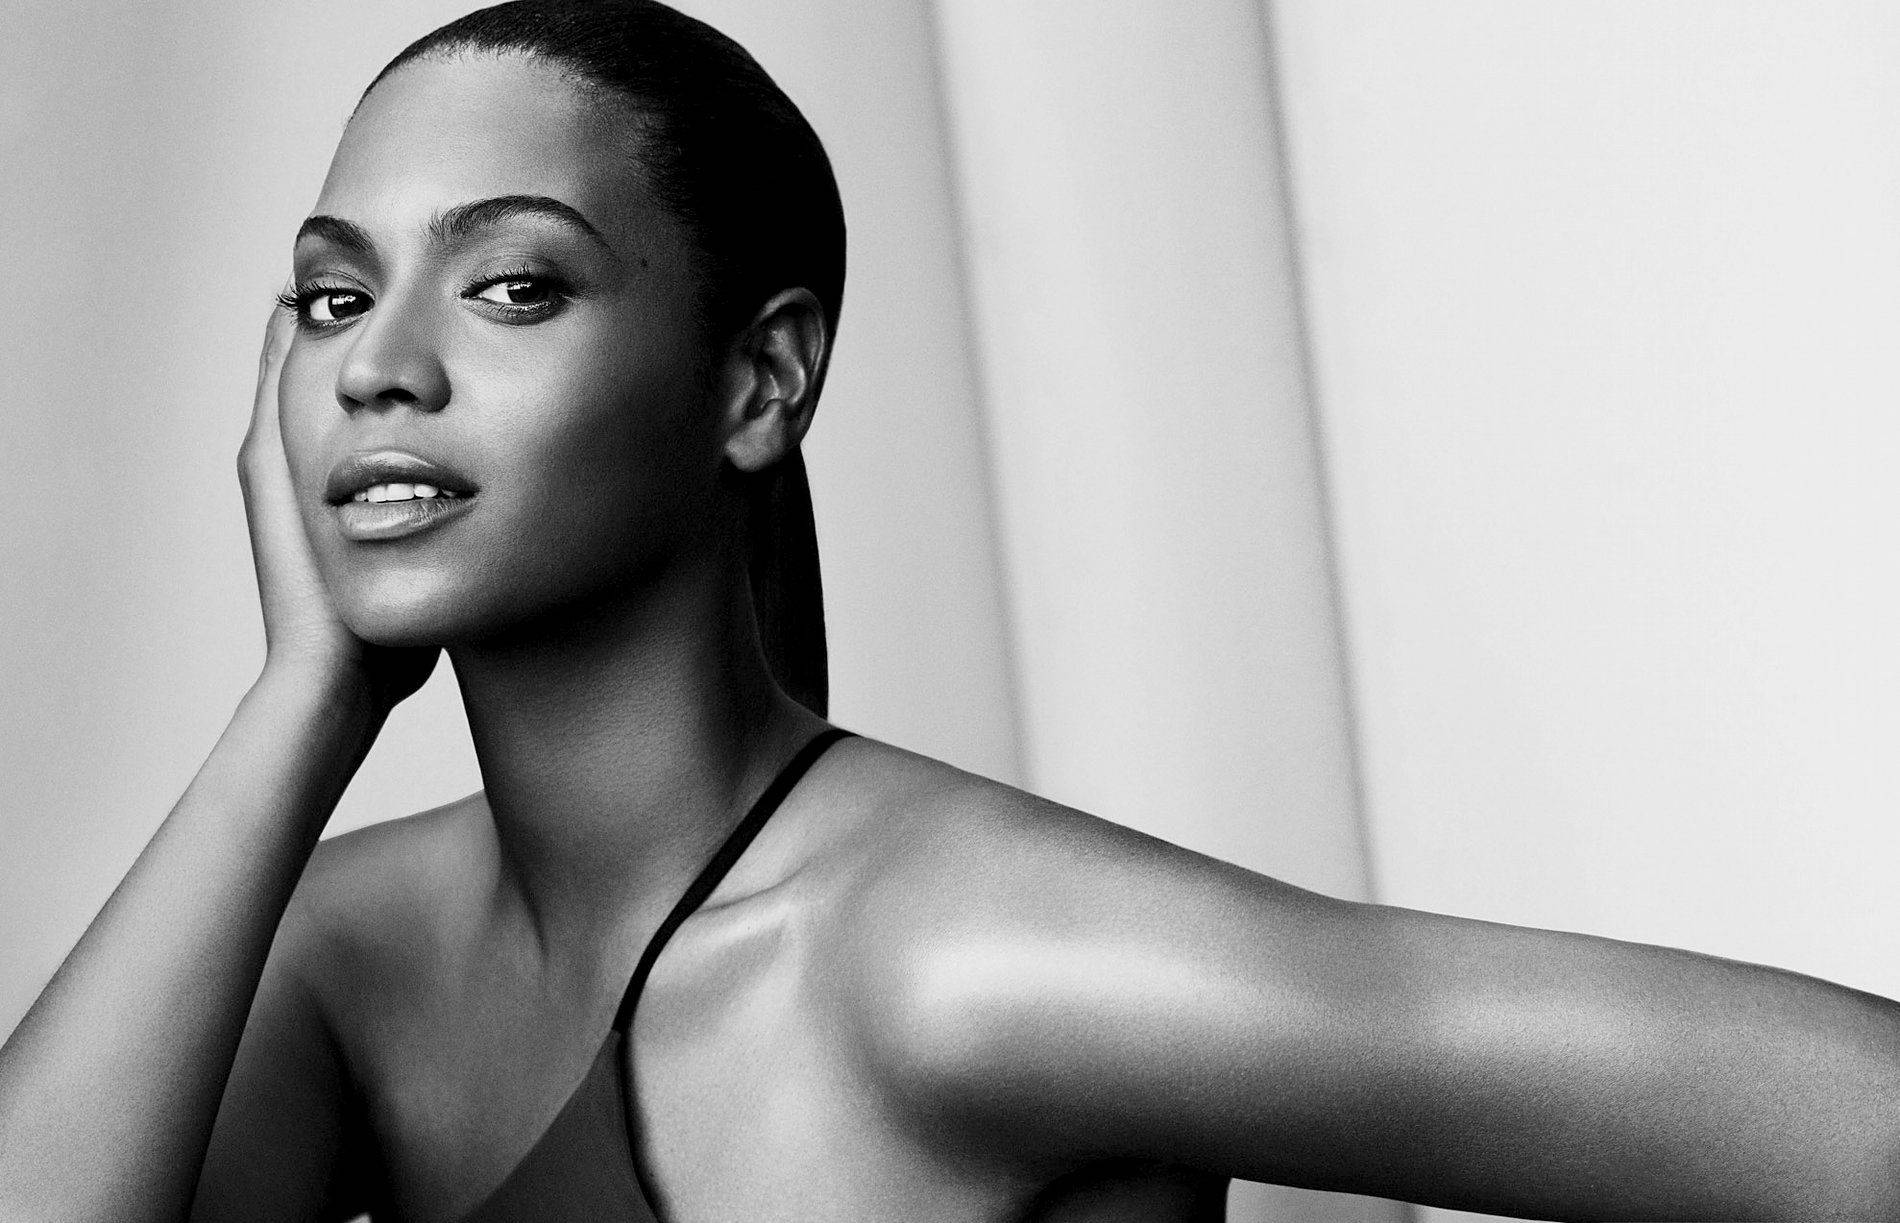 Queen Beyonce slaying in a black and white photo-shoot Wallpaper